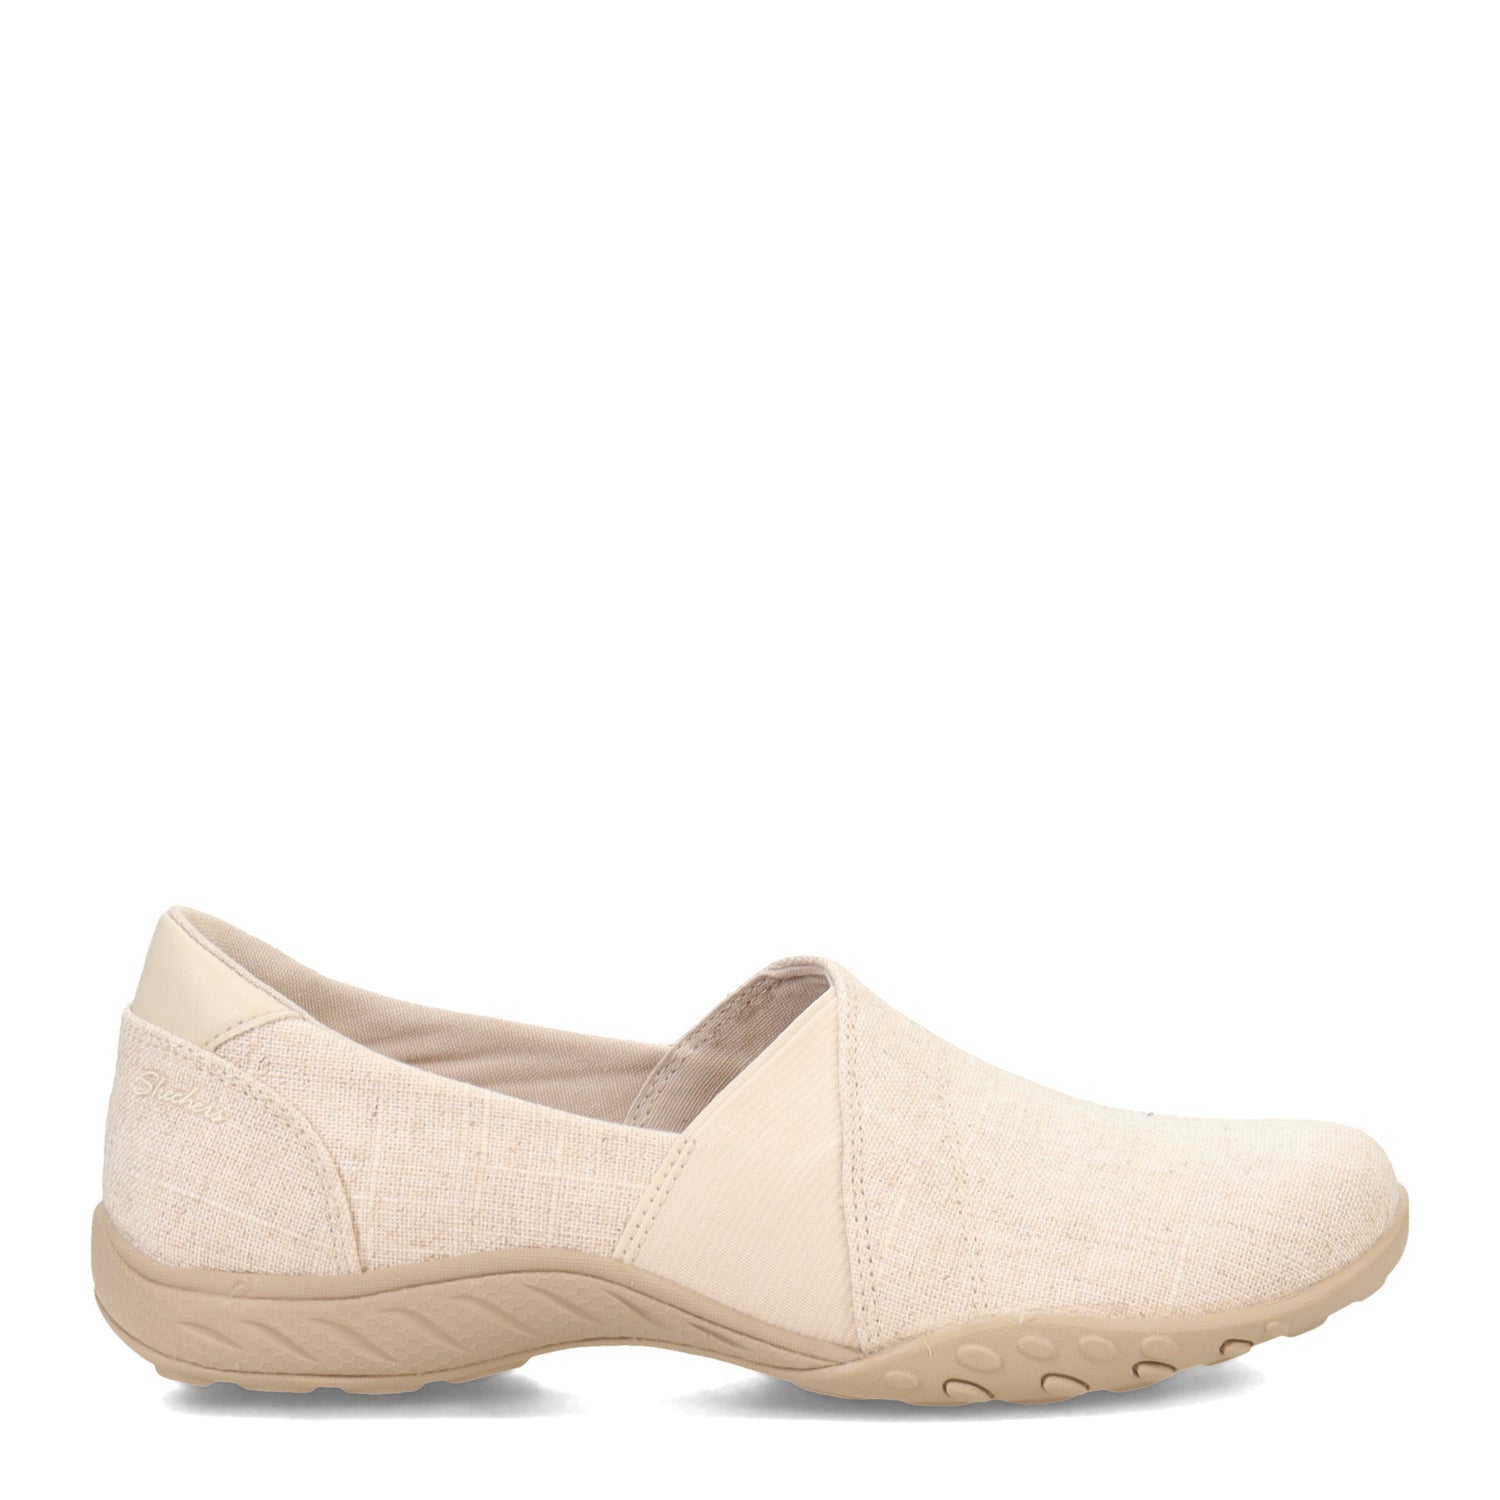 Peltz Shoes  Women's Skechers Relaxed Fit: Breathe-Easy - What A Beaut Slip-On Natural 100384-NAT